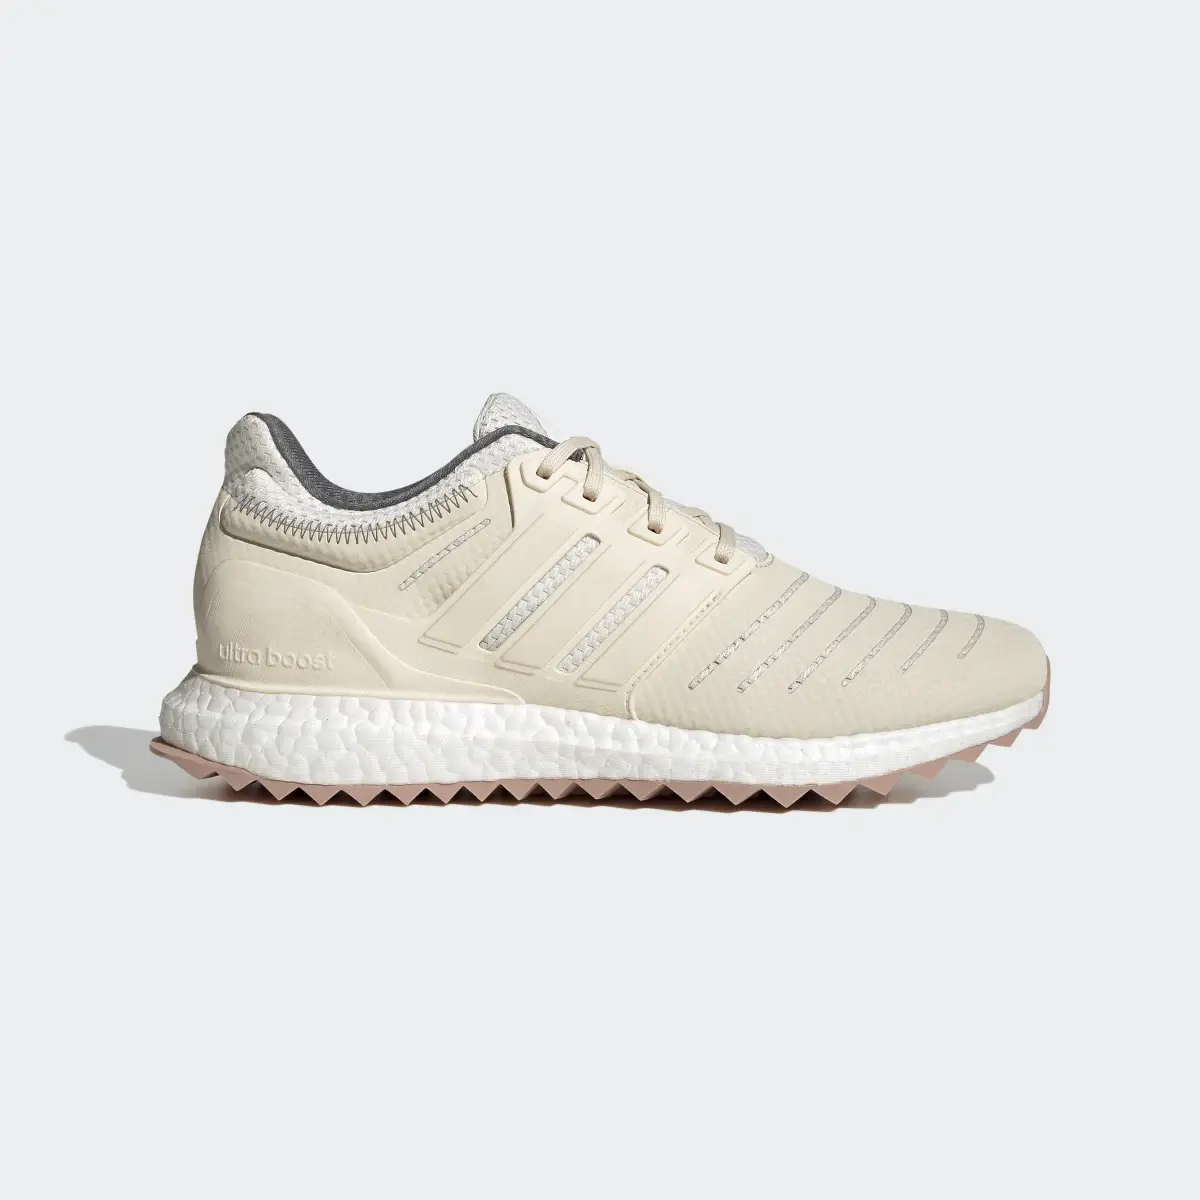 Adidas Chaussure Ultraboost DNA XXII Lifestyle Running Sportswear Capsule Collection. 2